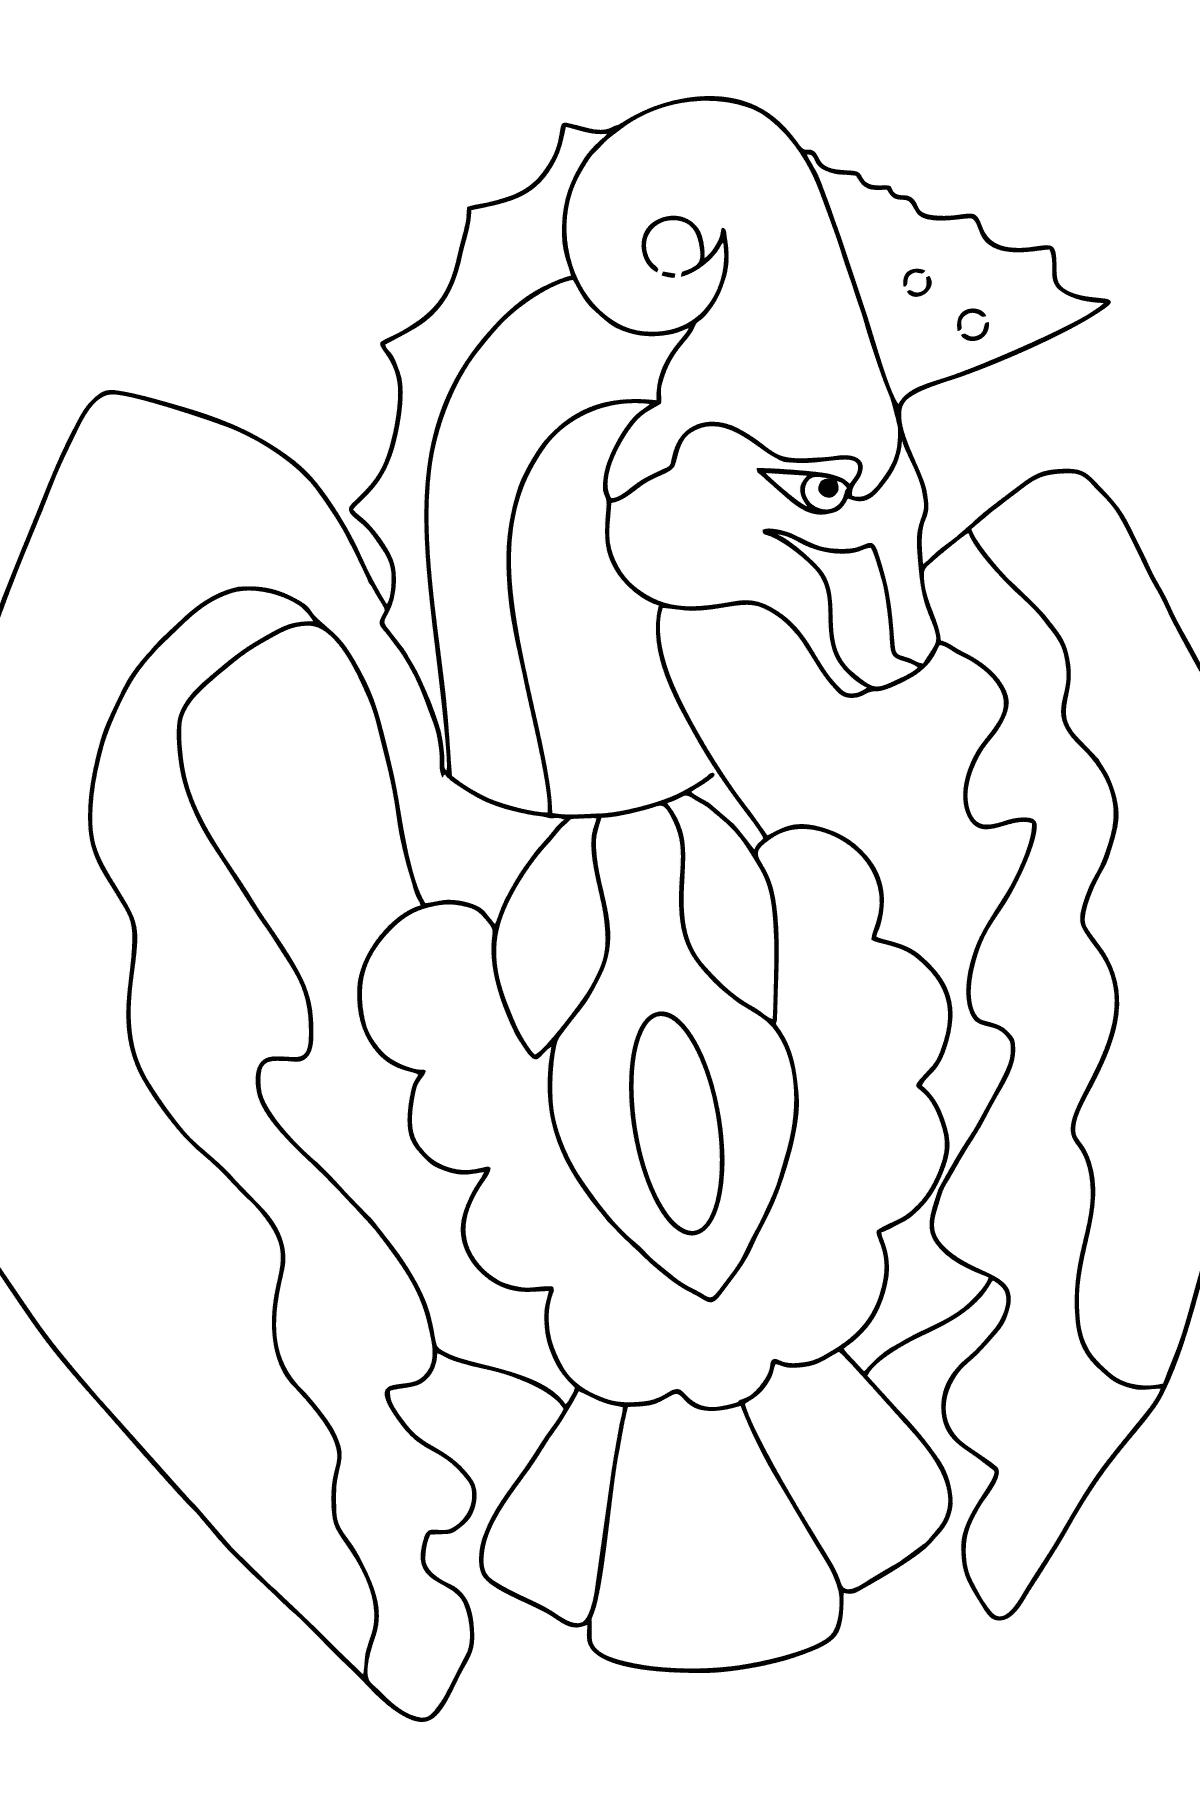 Coloring Page - A Dragon is Thinking - Coloring Pages for Kids